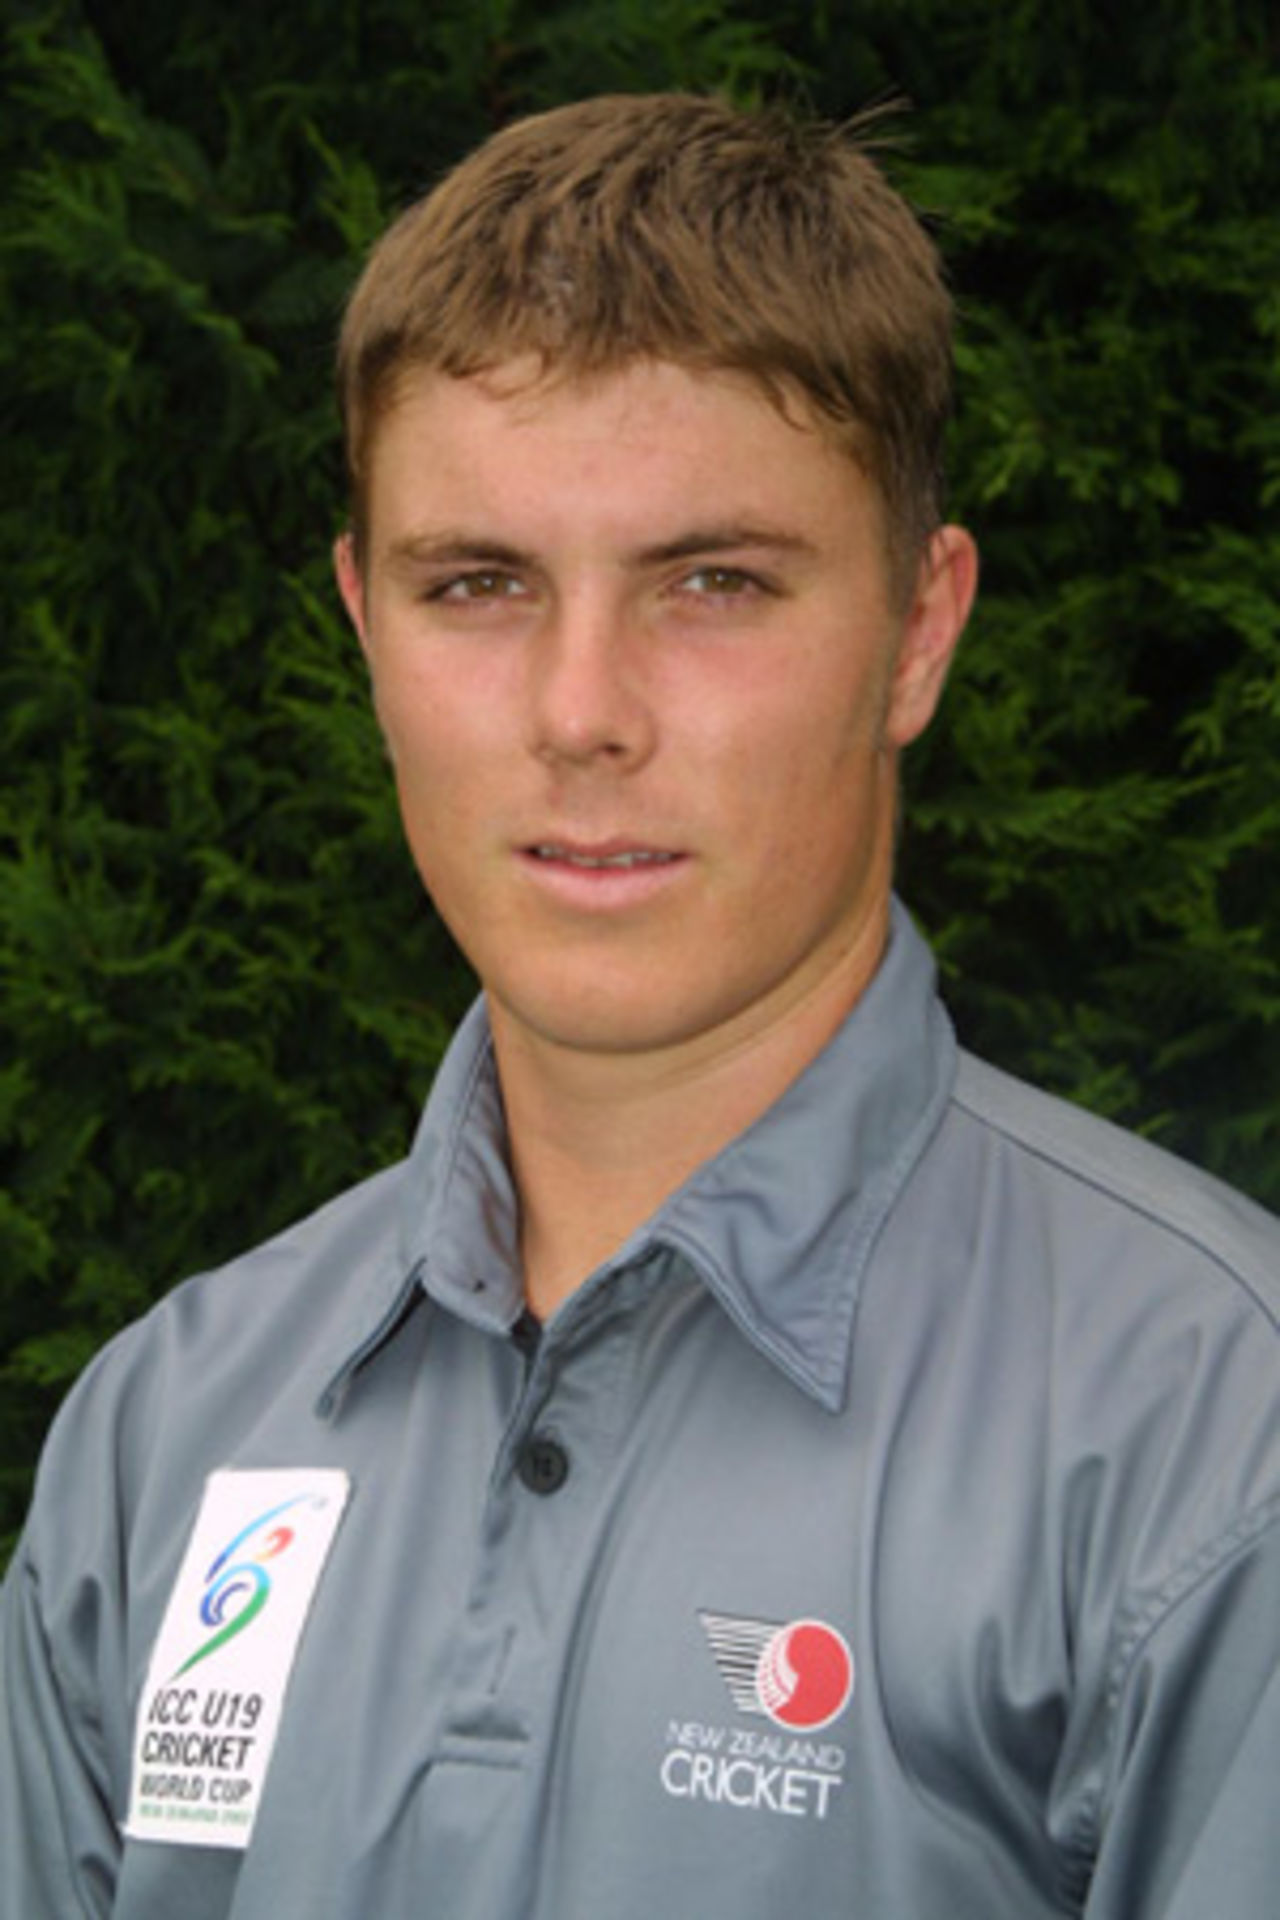 Portrait of Iain Robertson, January 2002 - New Zealand Under-19 player for the ICC Under-19 World Cup 2002.